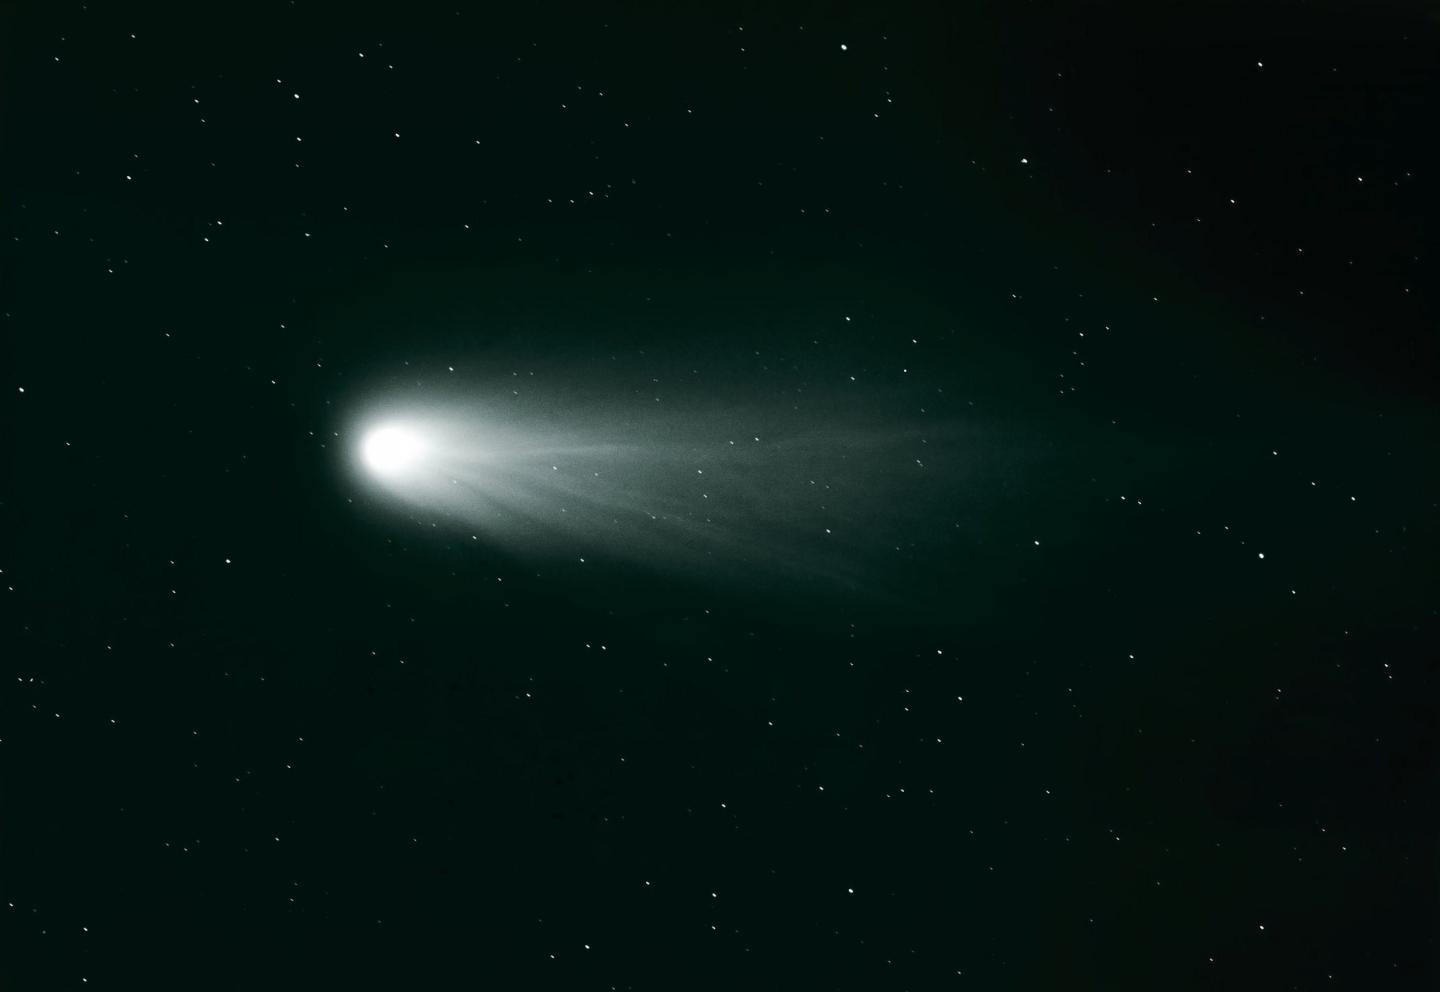 A photo of Halley's comet